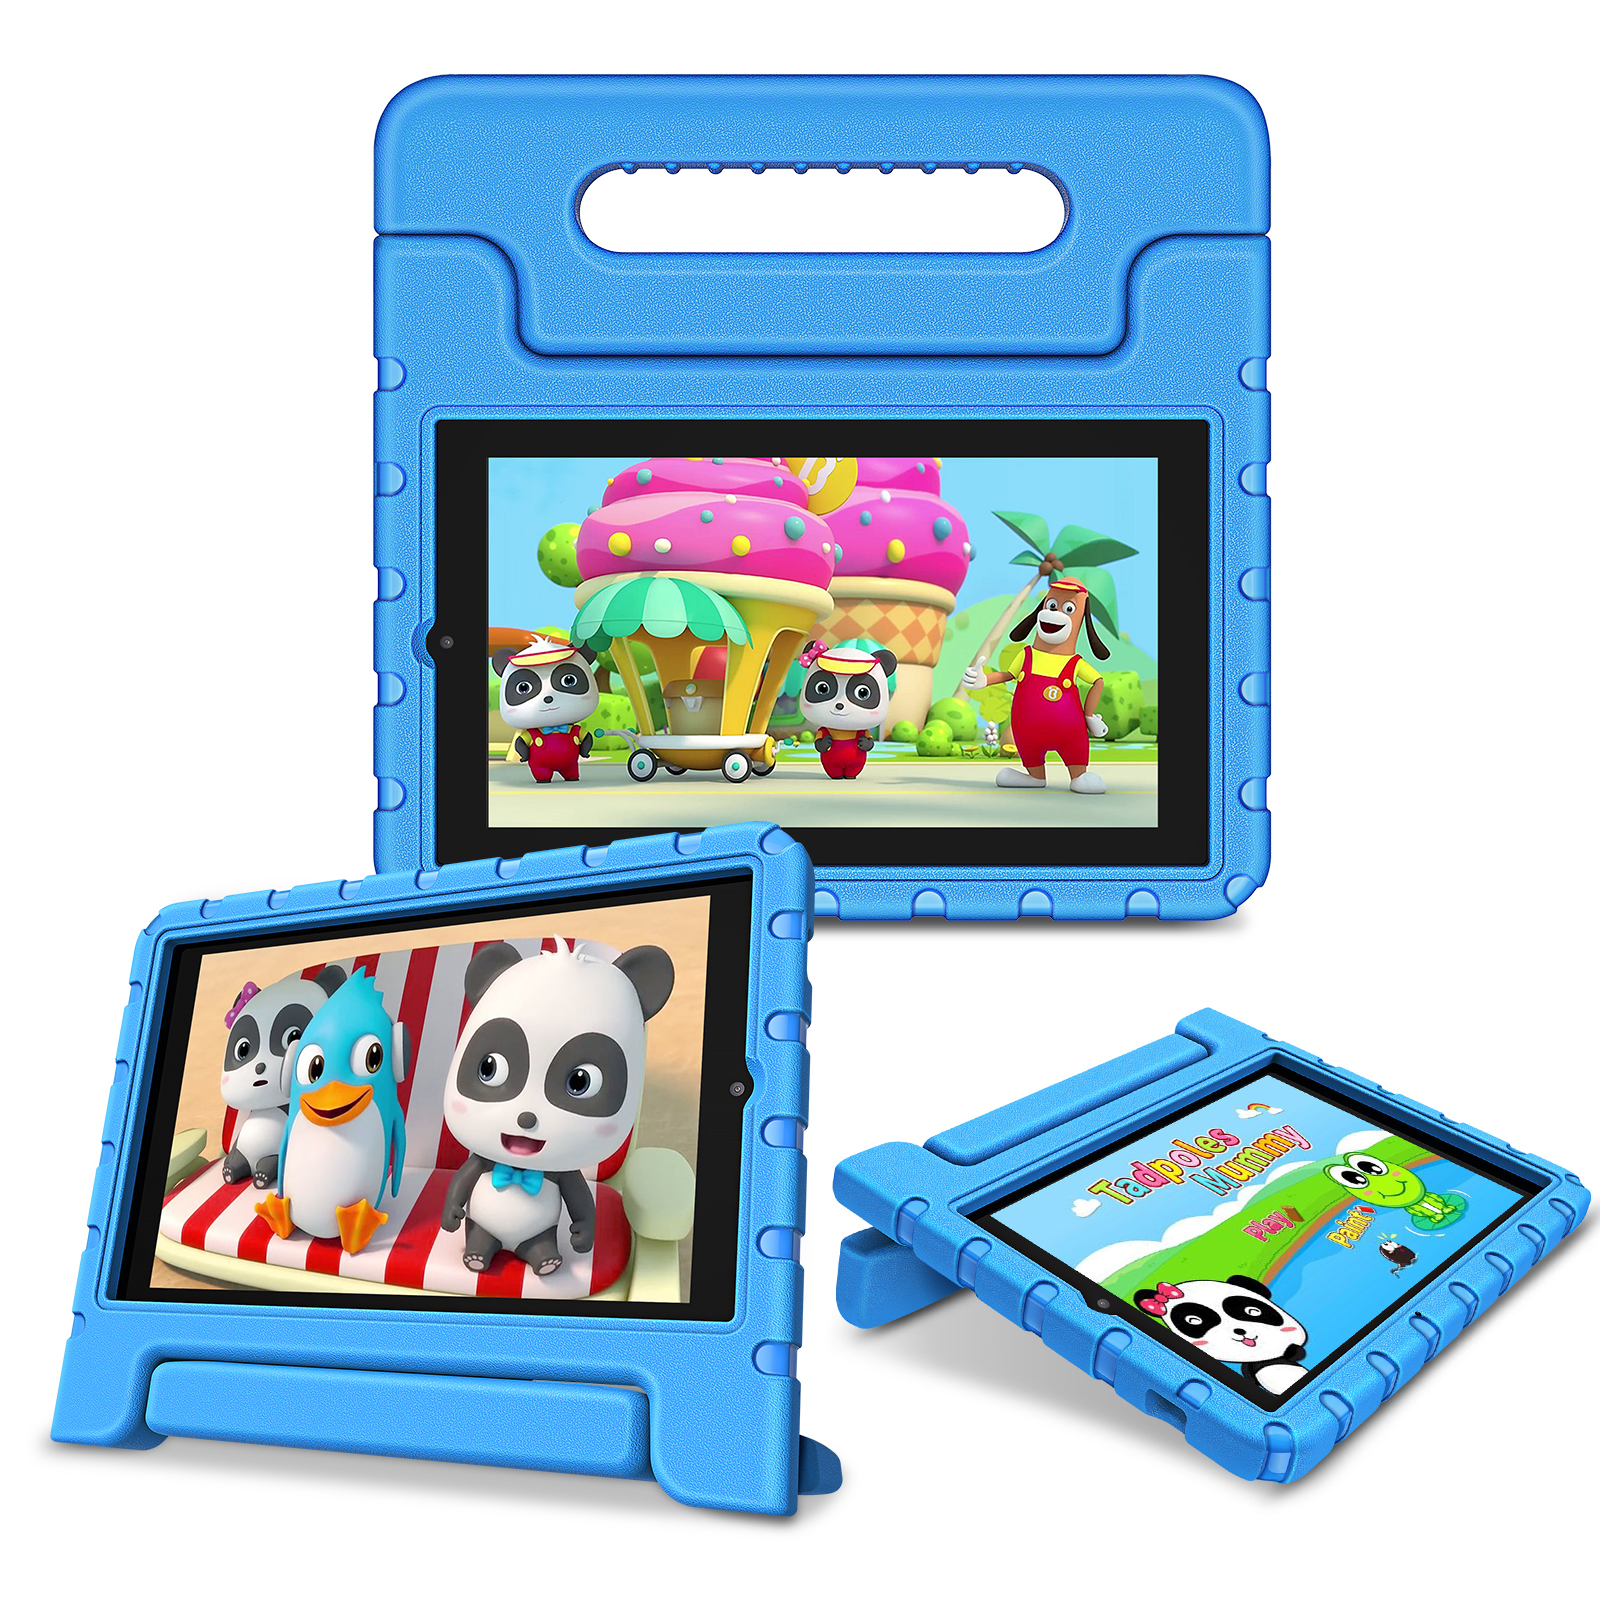 onn. 7 Inch Universal Tablet Case with Built-in Viewing Stand, Silicone ...